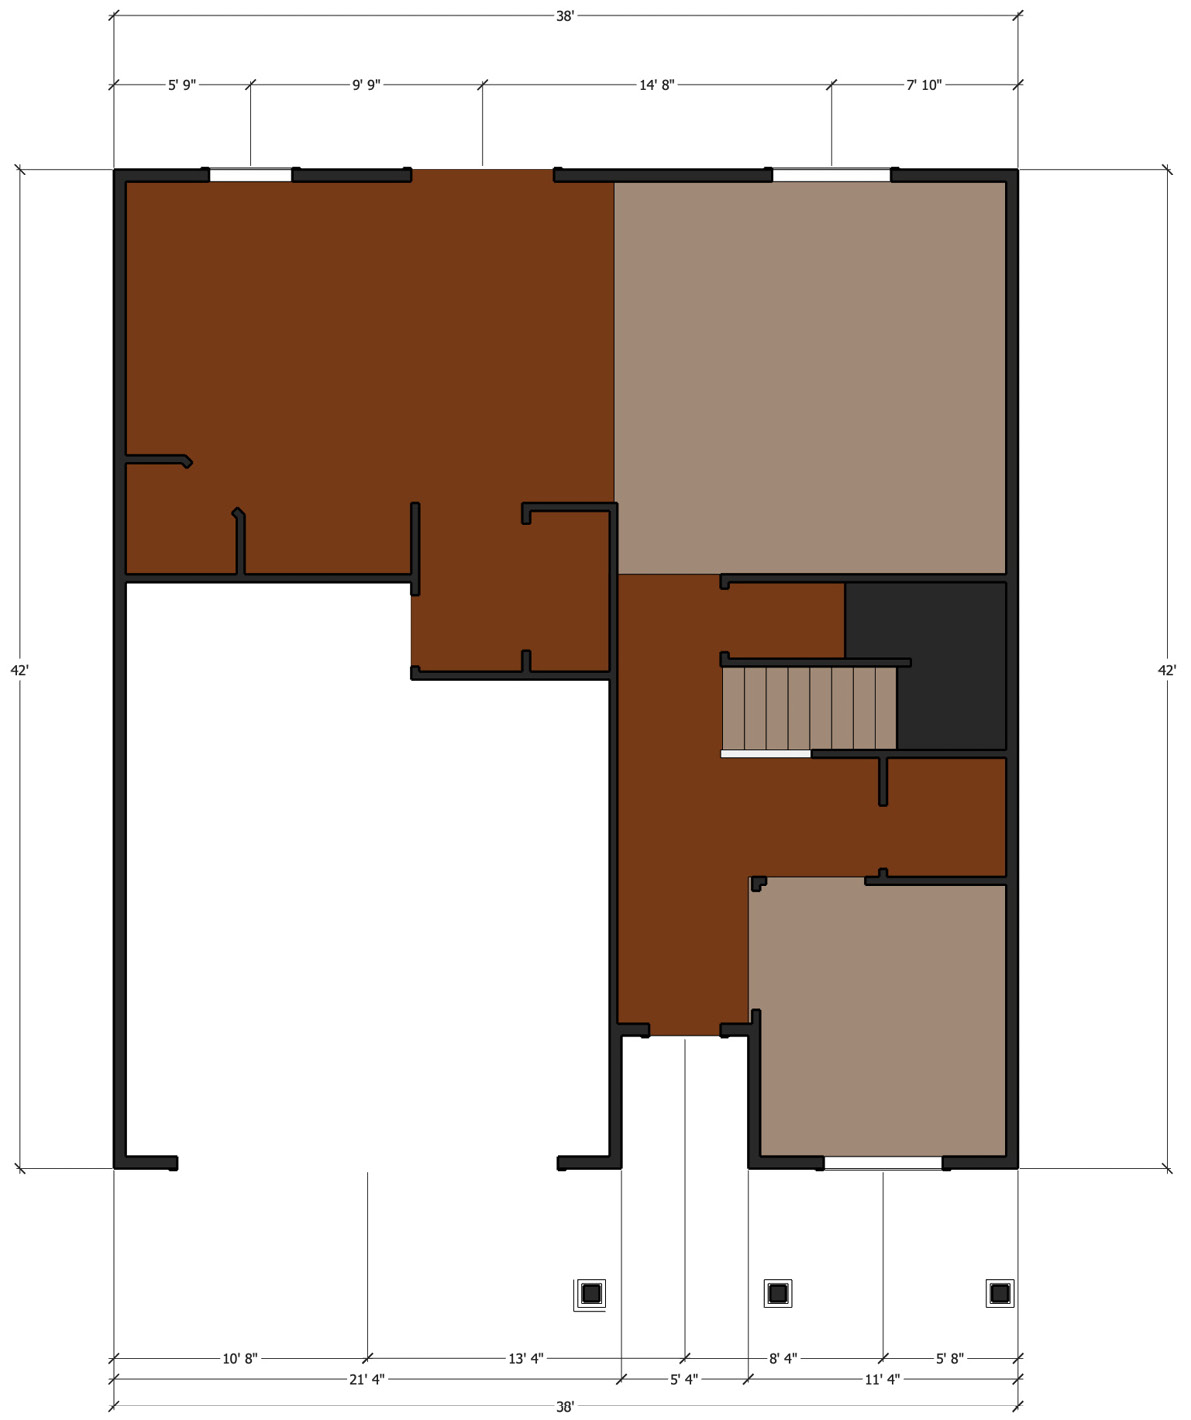 Figure 14.1 – Dimensioned floorplan exported directly from SketchUp
